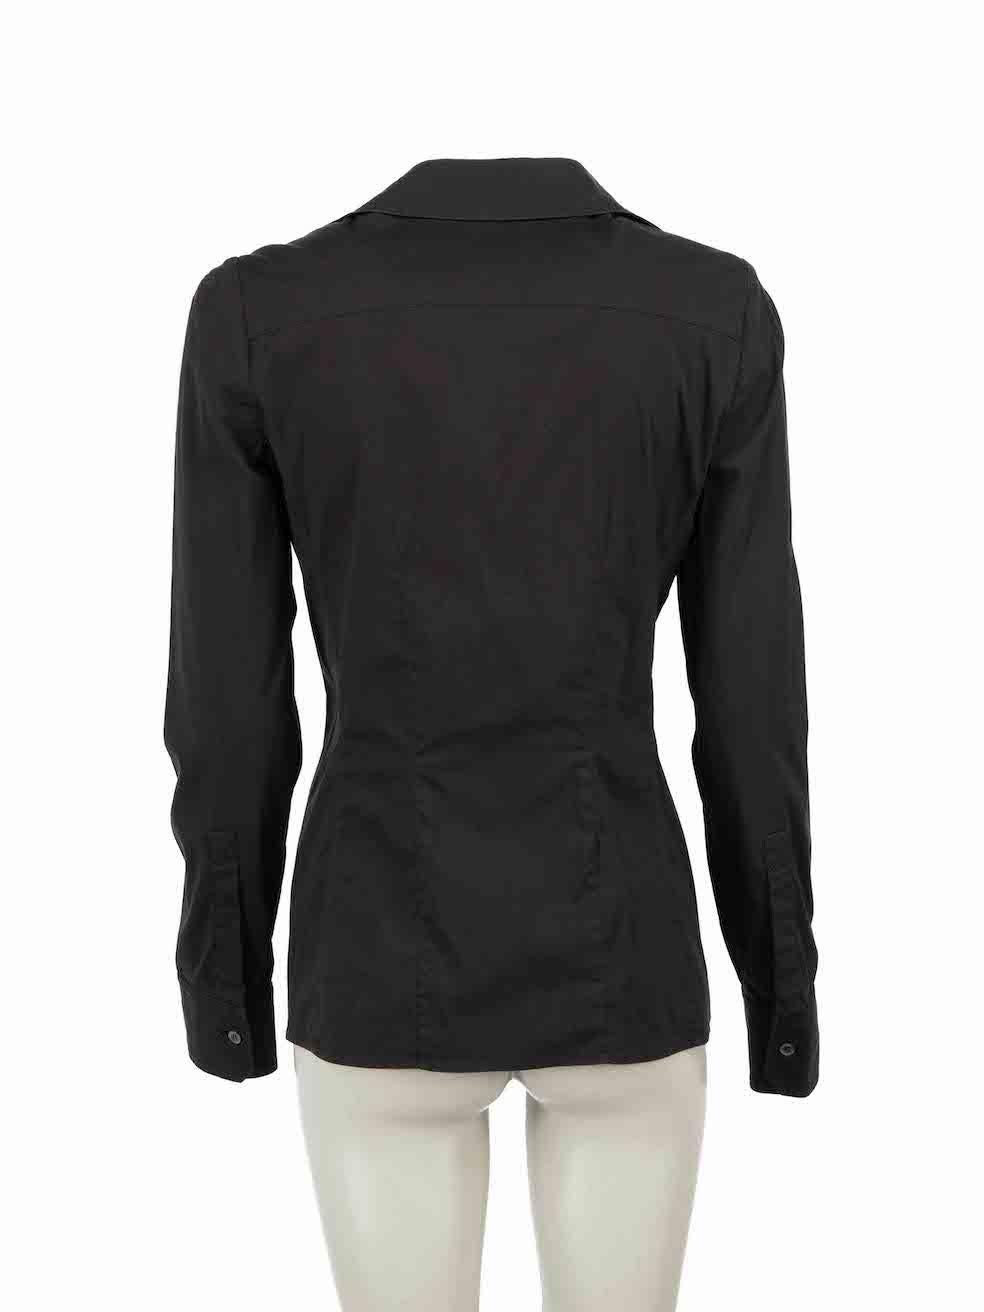 Gucci Black Cotton Fitted Clasp Accent Shirt Size M In Excellent Condition For Sale In London, GB